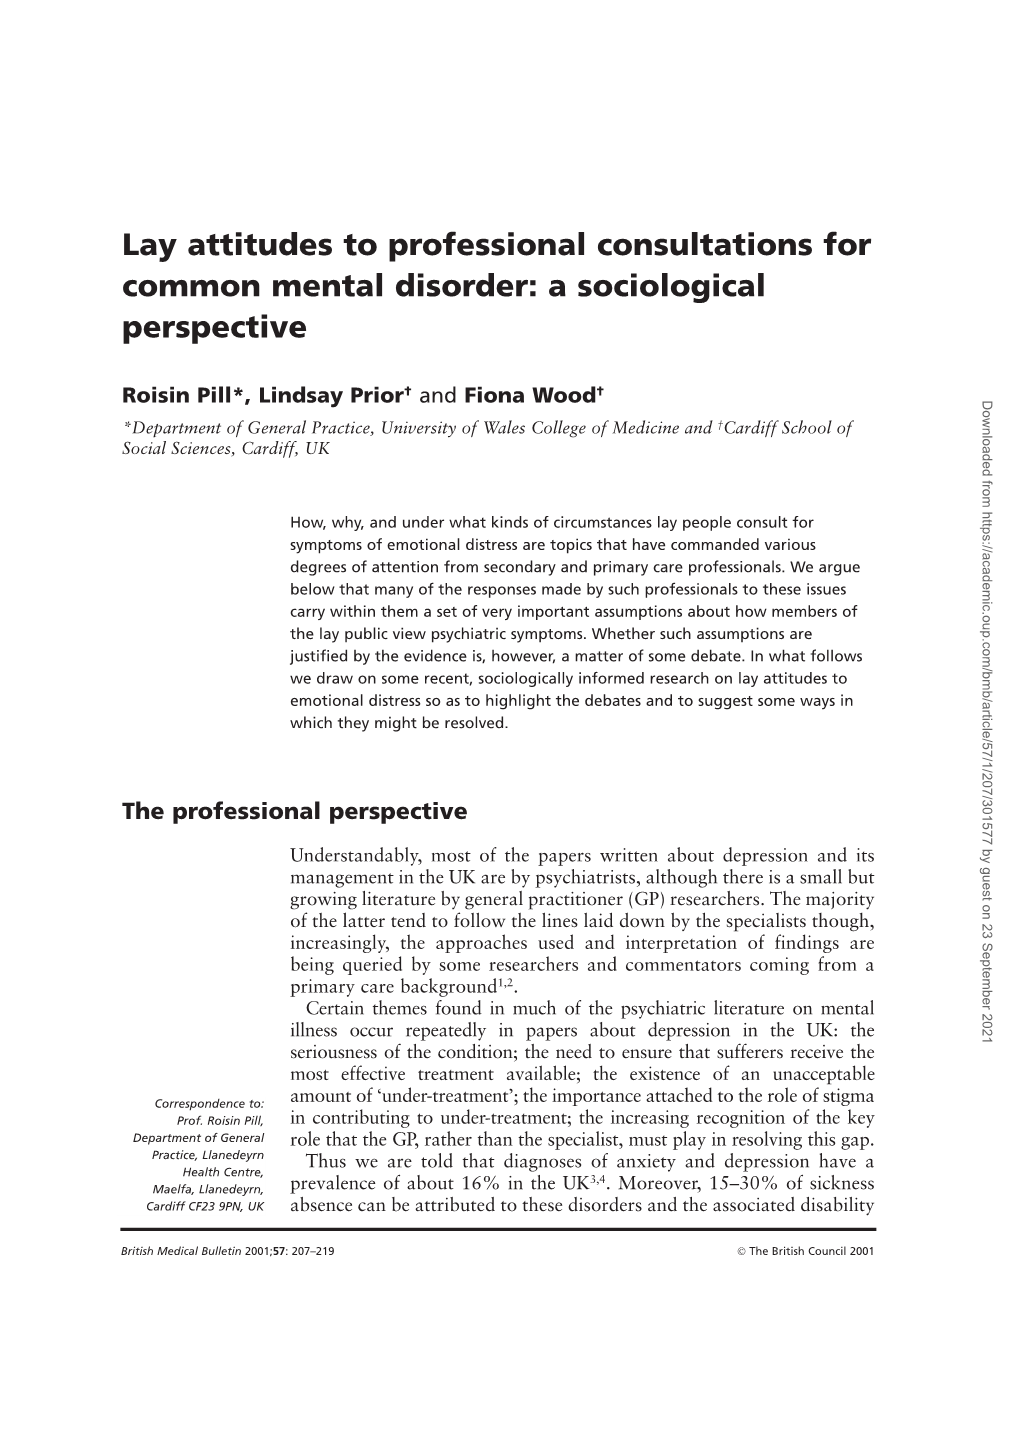 Lay Attitudes to Professional Consultations for Common Mental Disorder: a Sociological Perspective